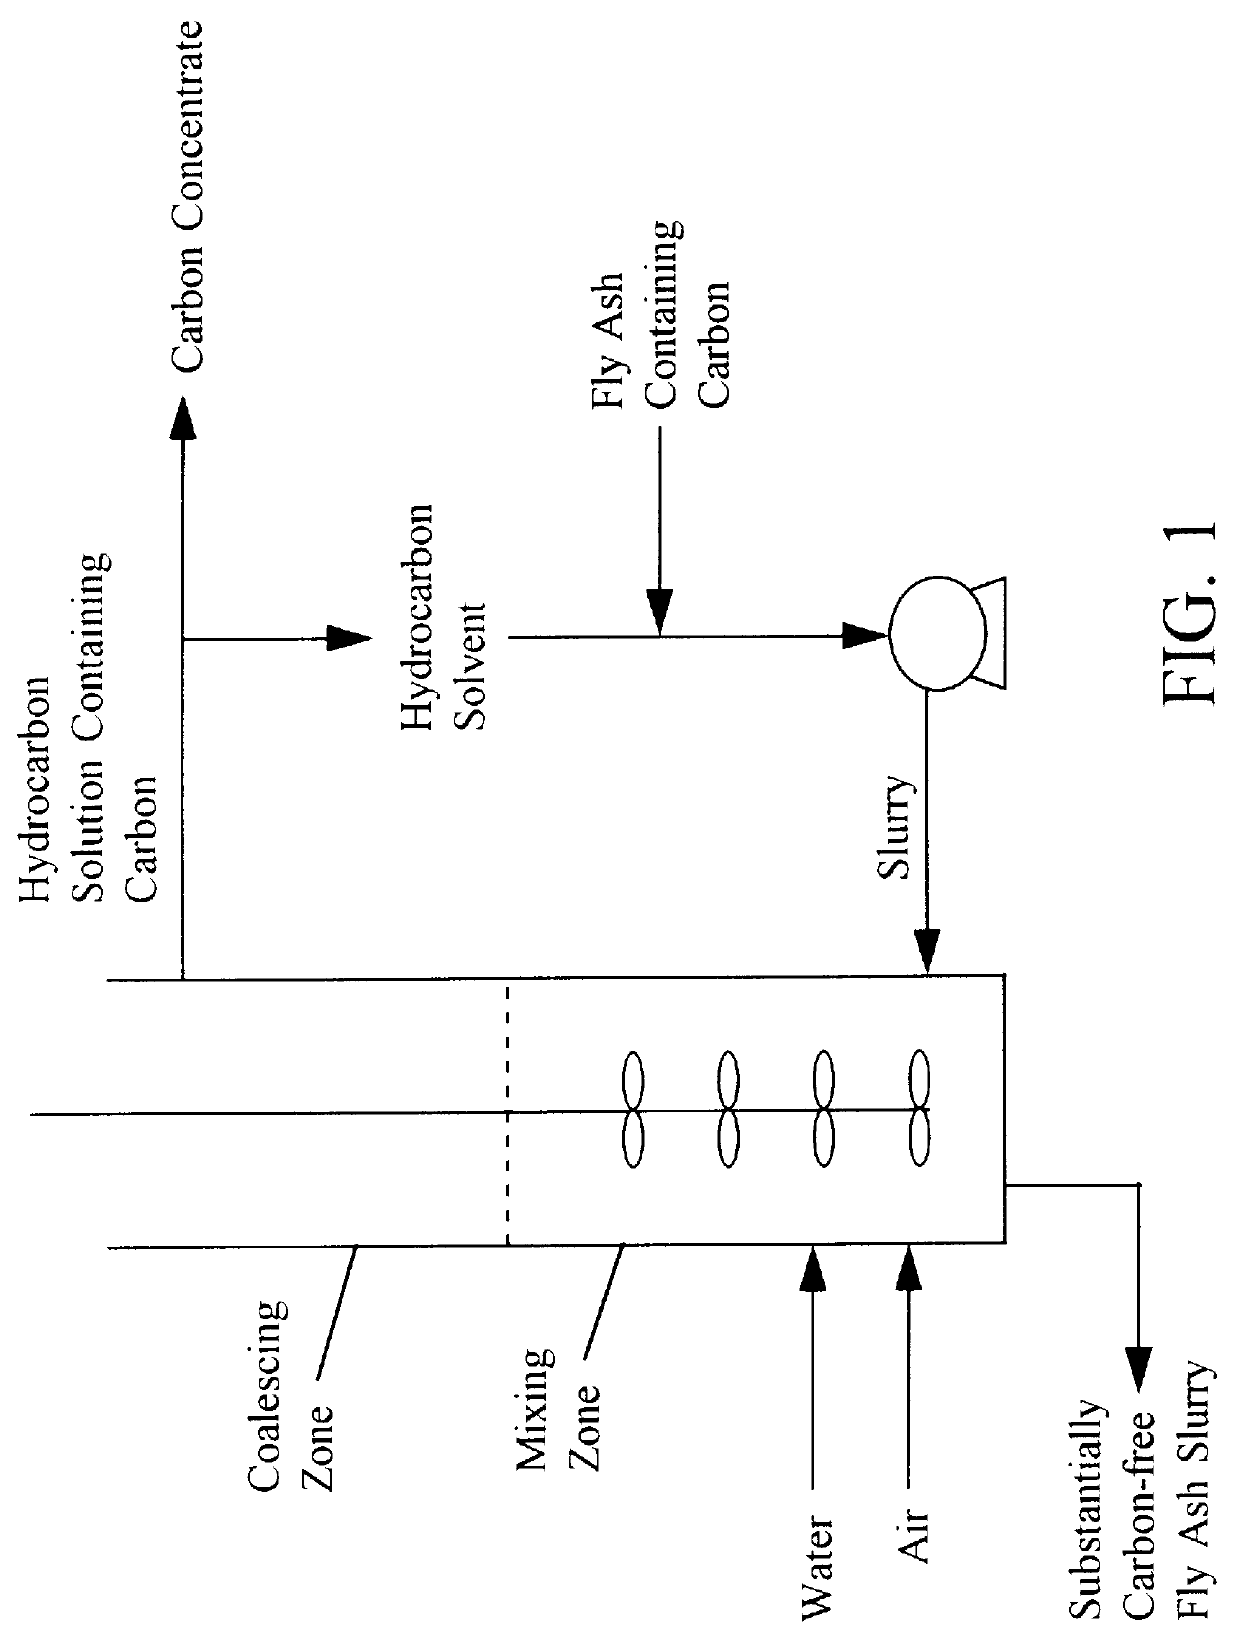 Continuous air agglomeration method for high carbon fly ash beneficiation